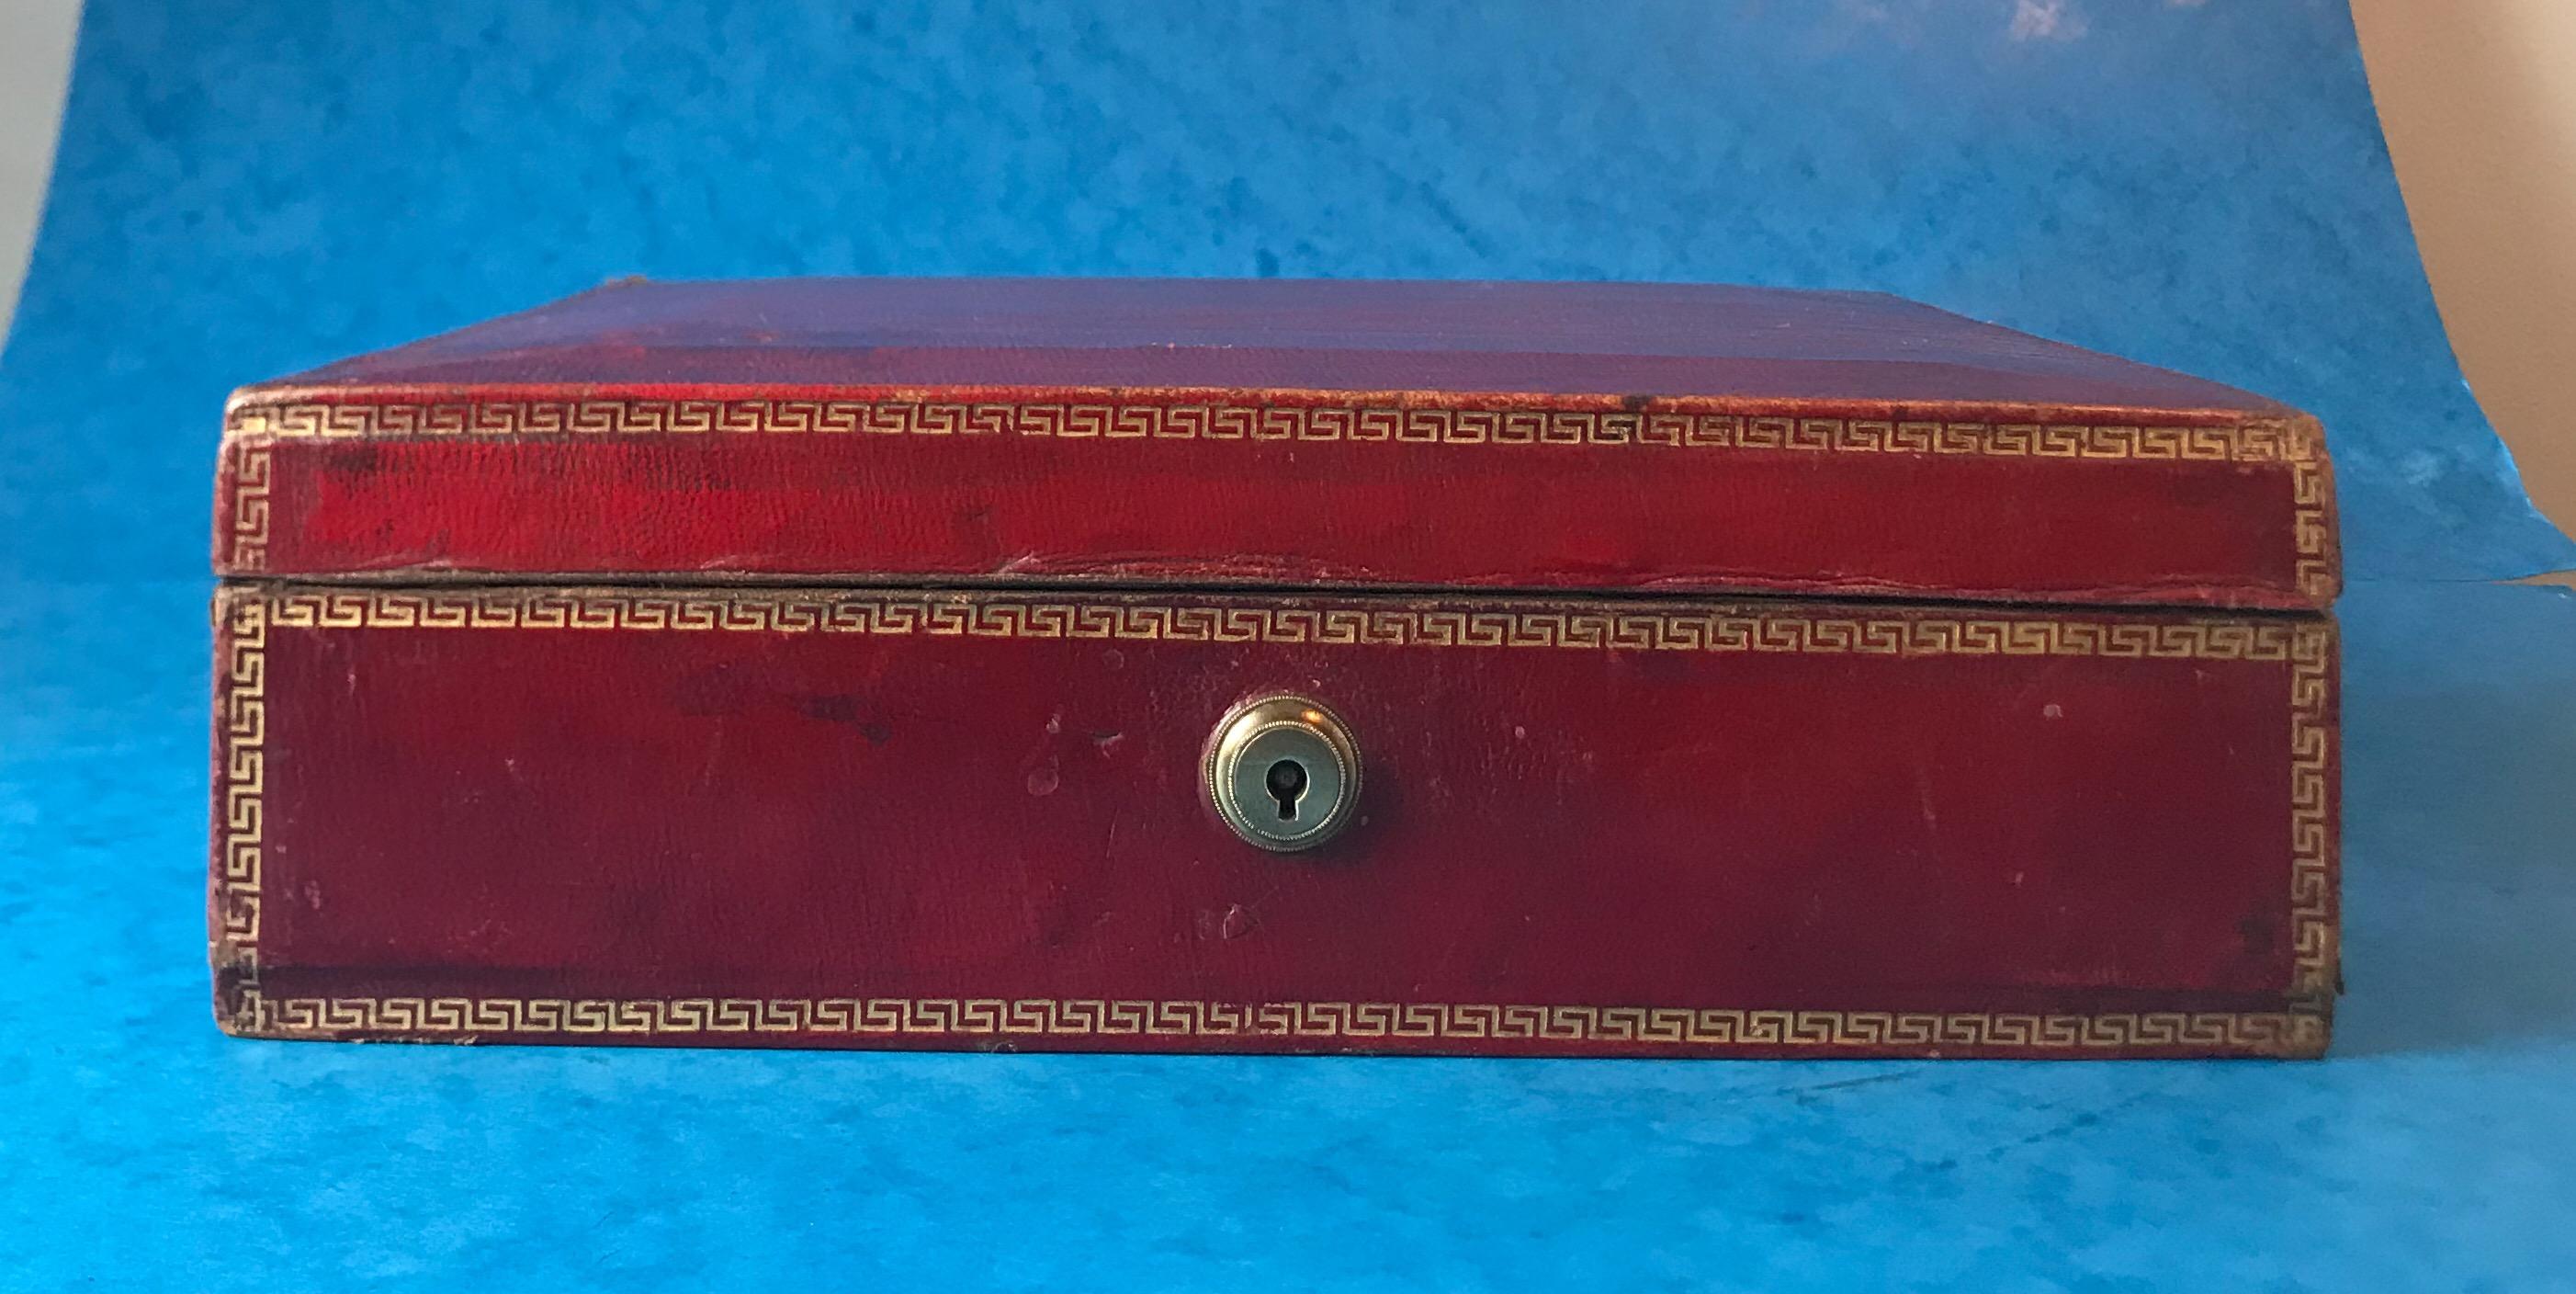 A rare Georgian 1820 red Moroccan leather jewelry box
It has a Grecian key gilt design around the edges of the box.
The jewelry box features a very early Brahma lock, unfortunately it doesn’t come with a key.
The jewelry box has it’s original